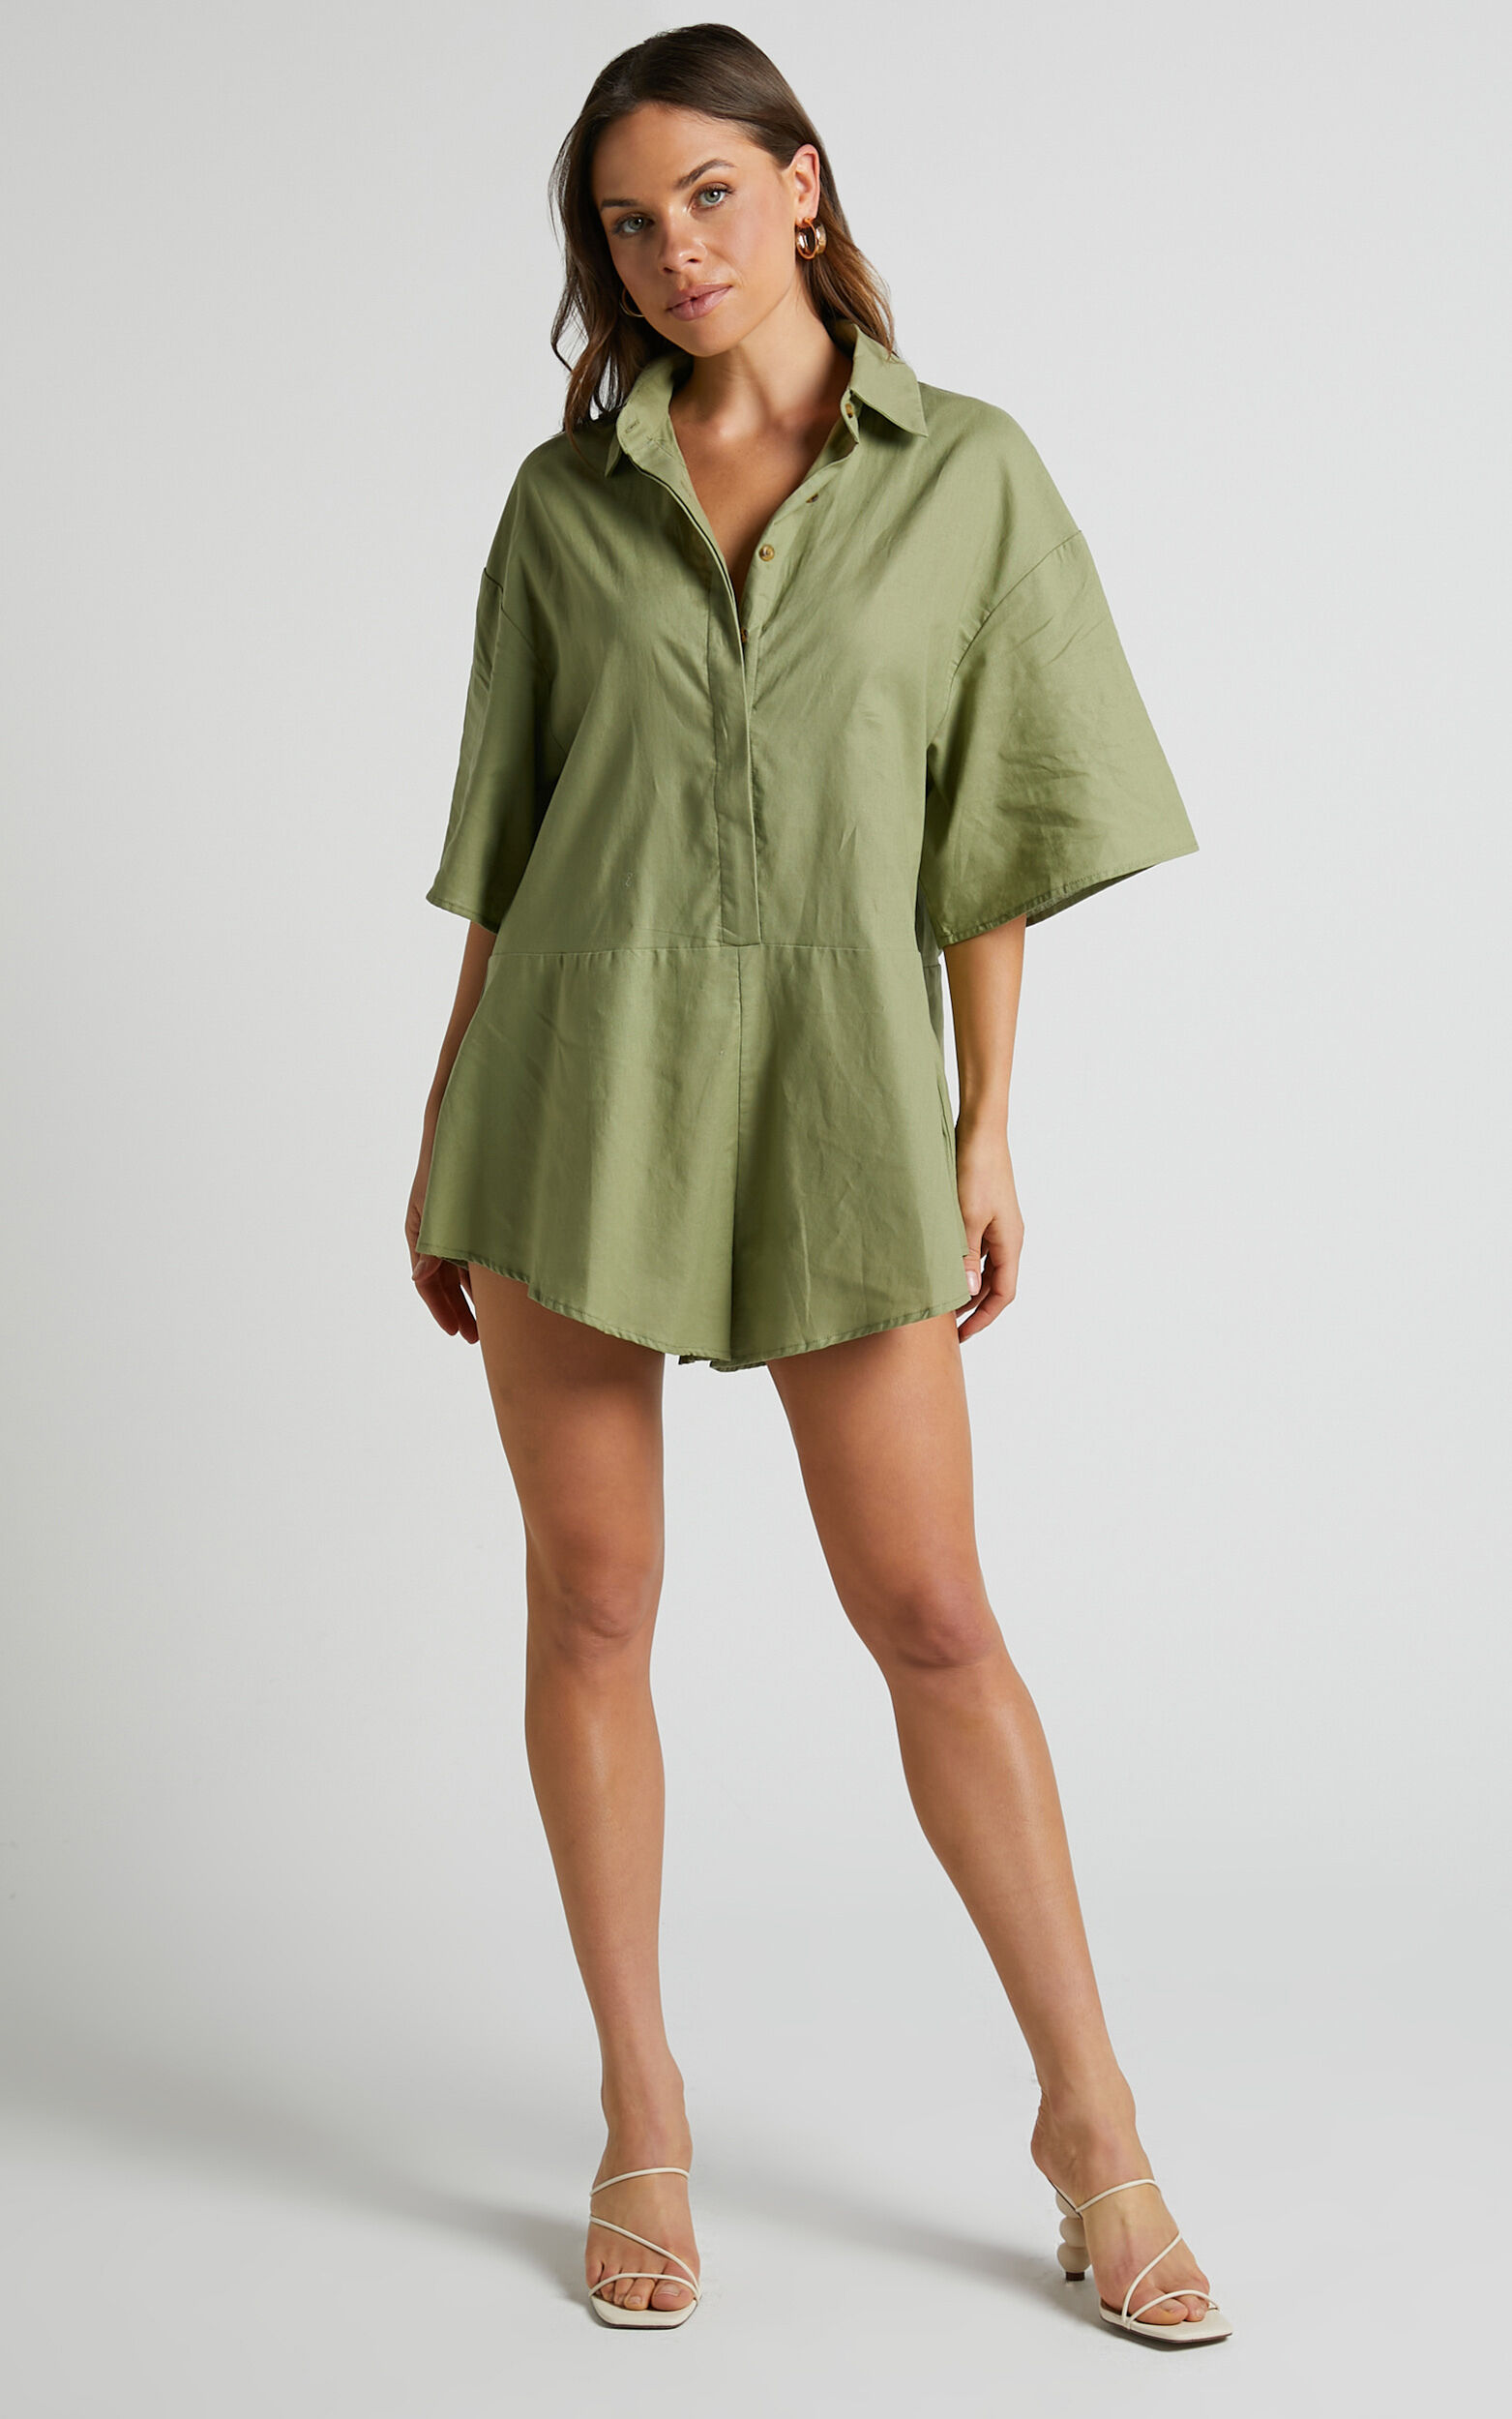 Ankana Playsuit - Short Sleeve Relaxed Button Front Playsuit in Light Olive - 06, GRN1